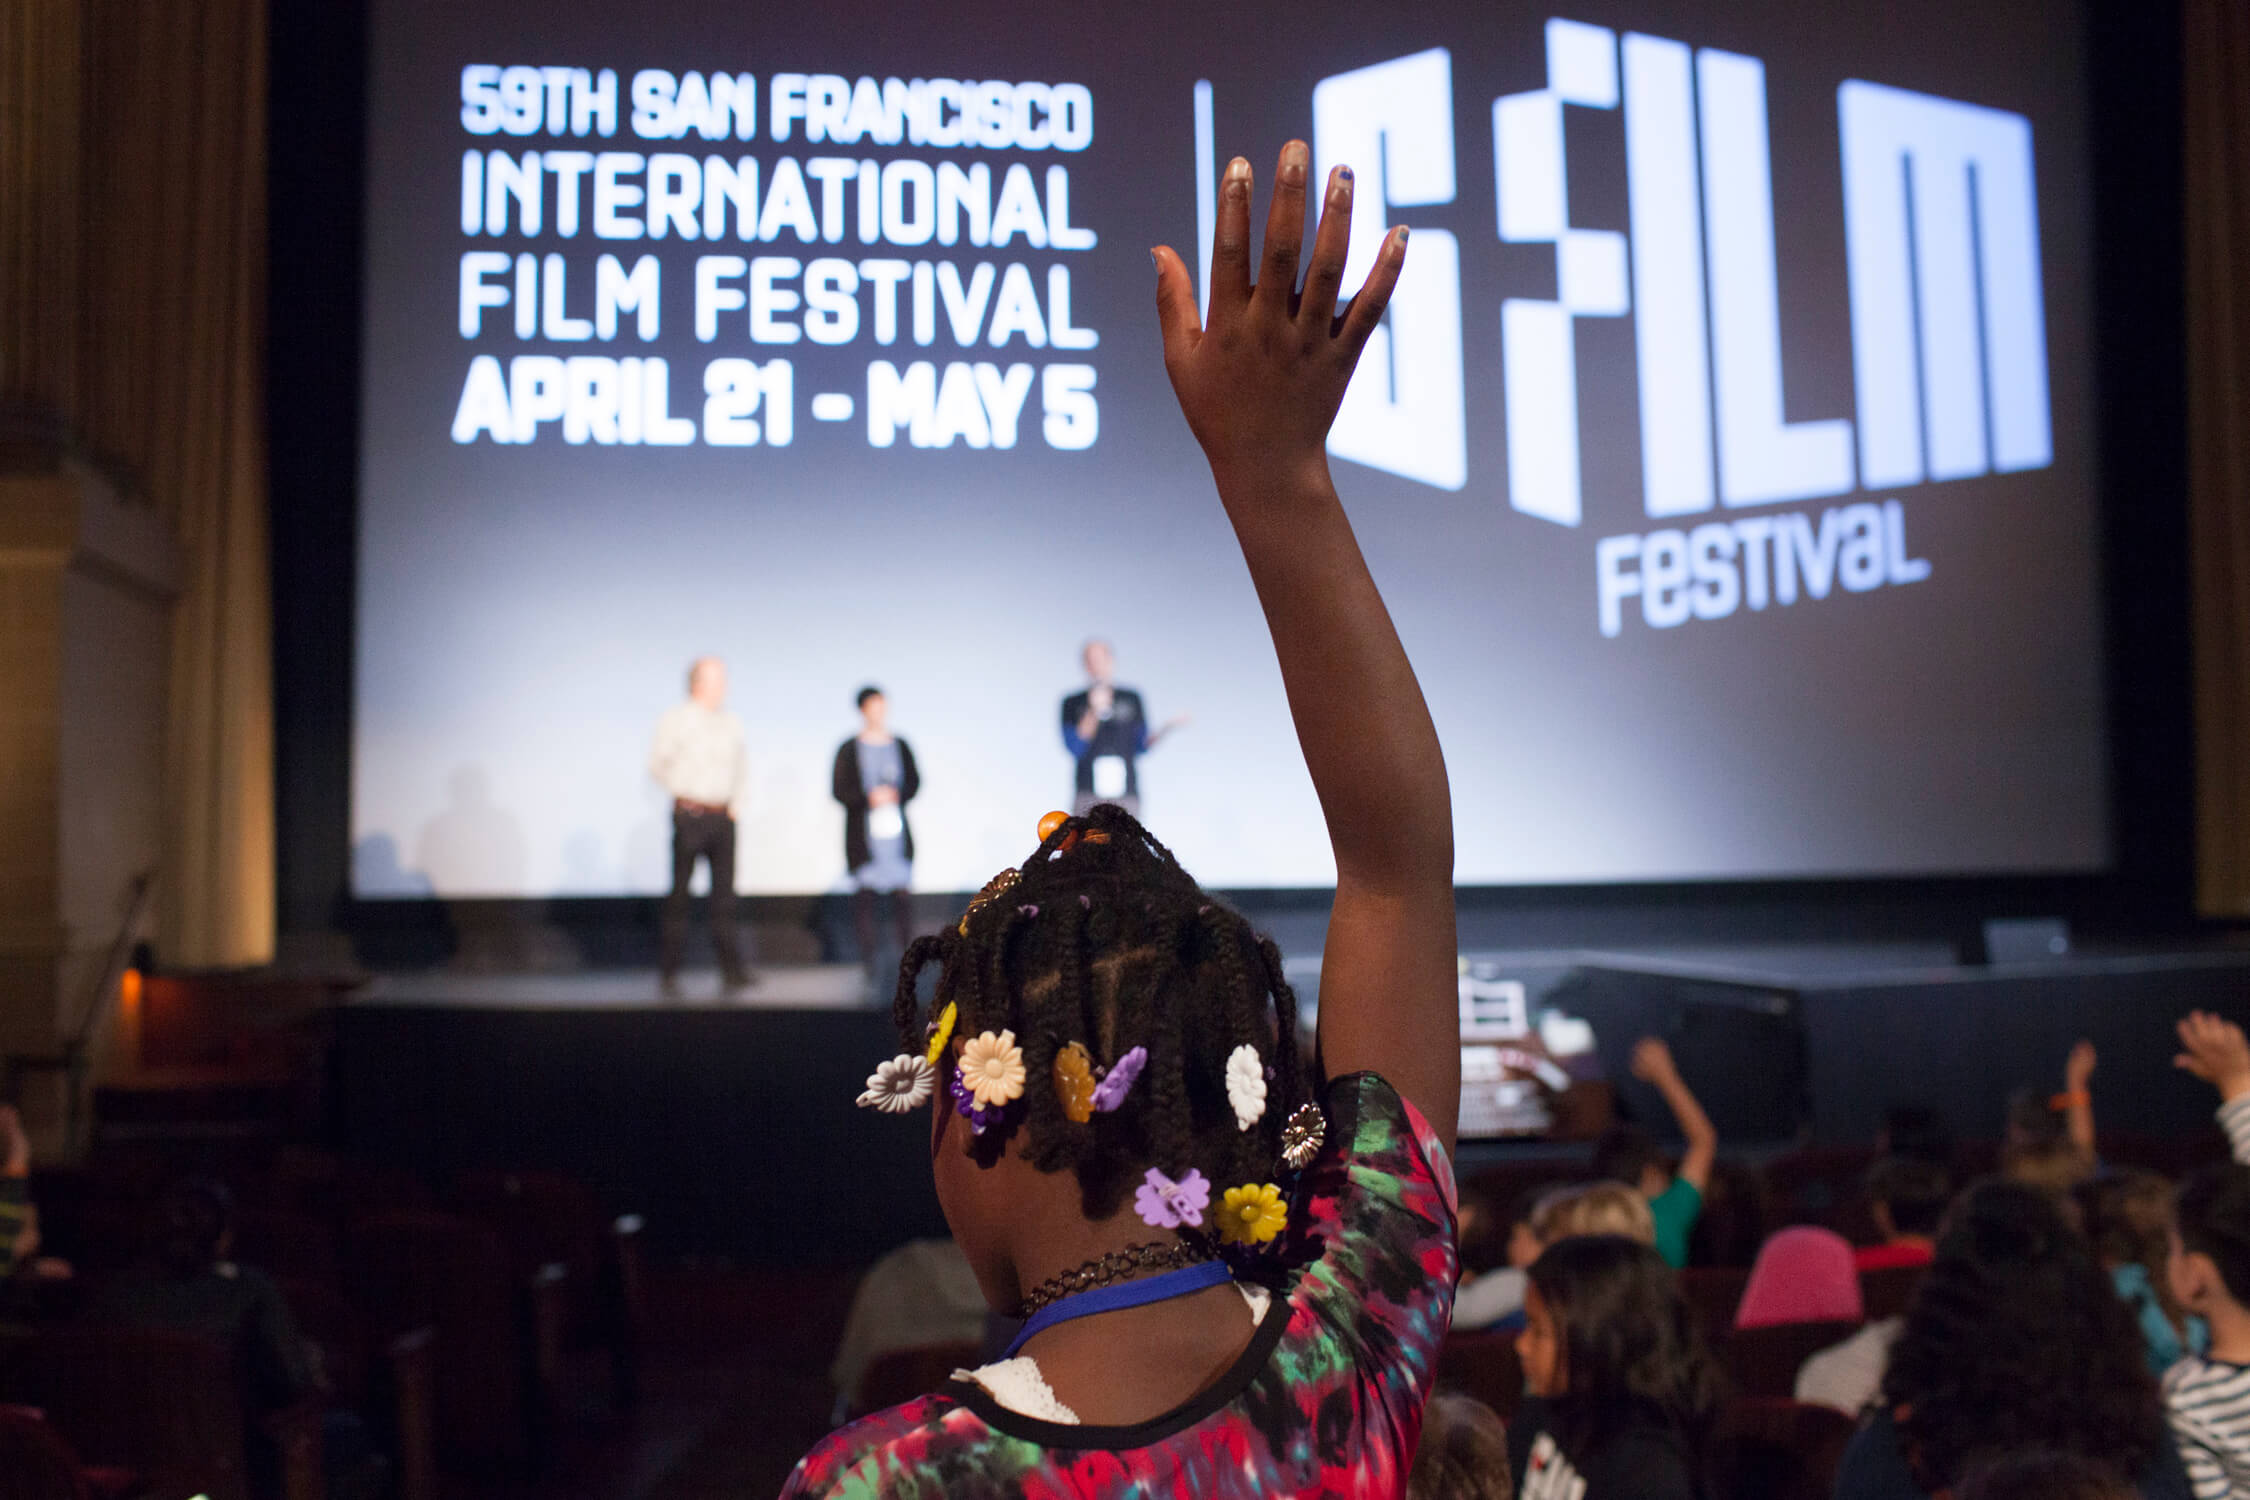 16 Facts About San Francisco International Film Festival